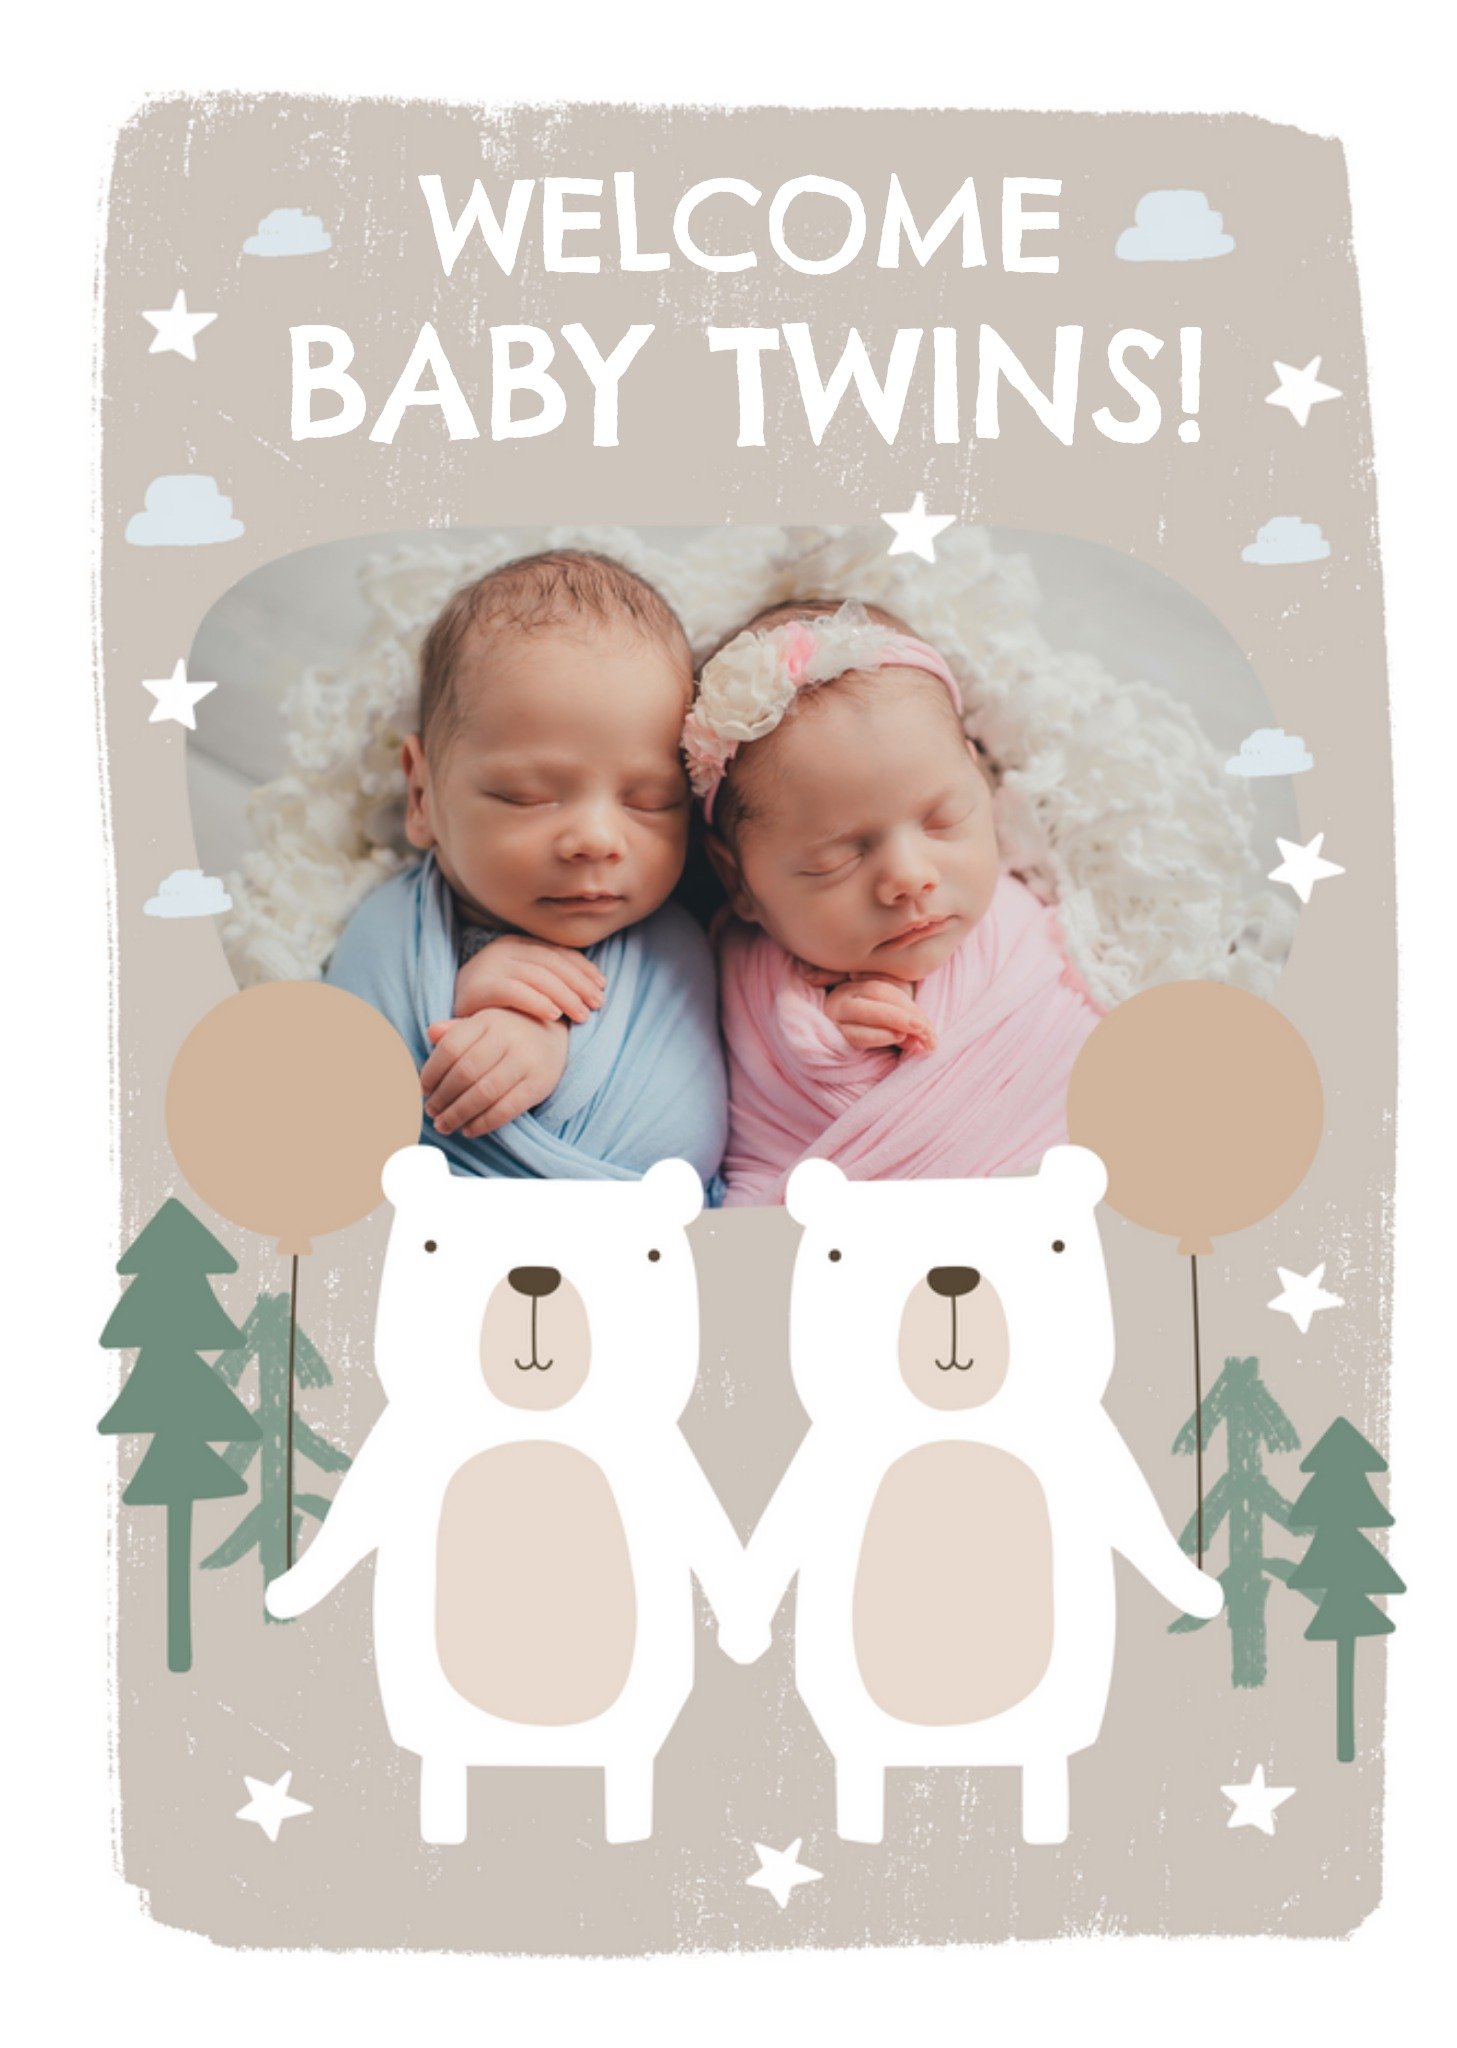 Moonpig Sweet Welcome Baby Illustrated Twin Polar Bears In The Woods Holding Balloons Photo Upload N